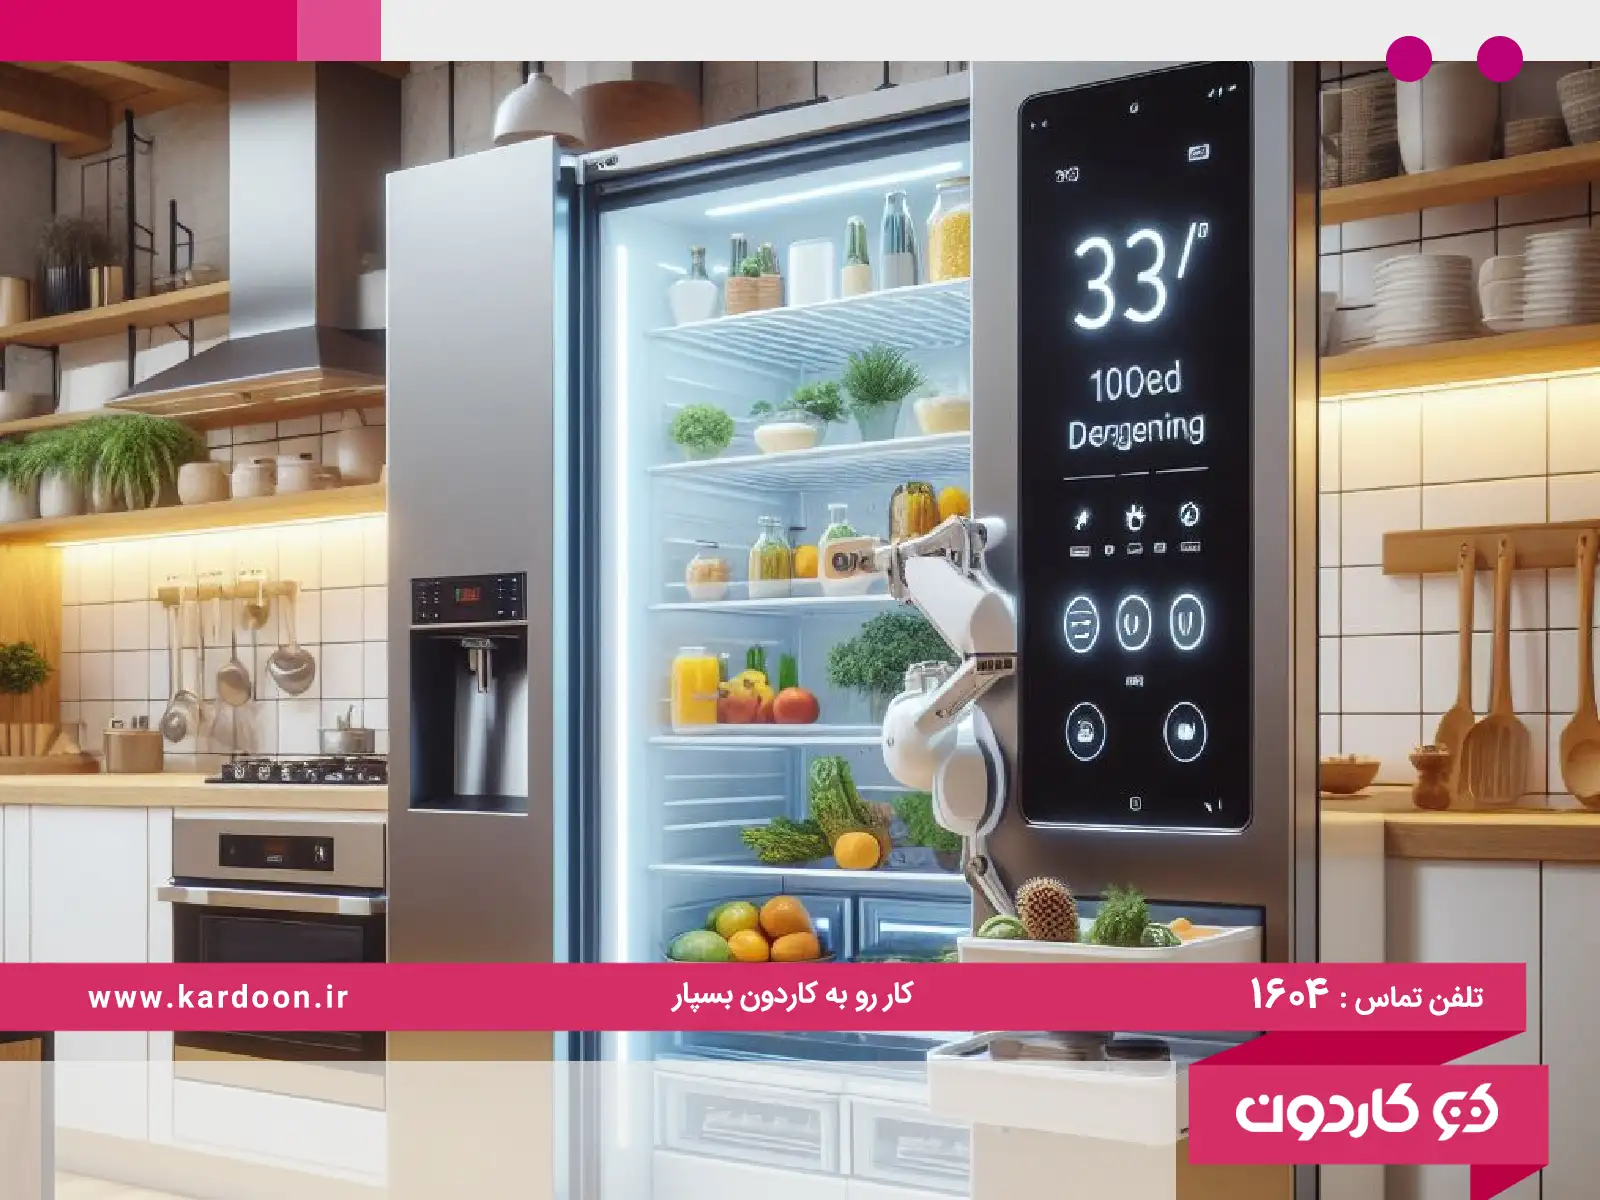 The duration of automatic refrigerator freezer